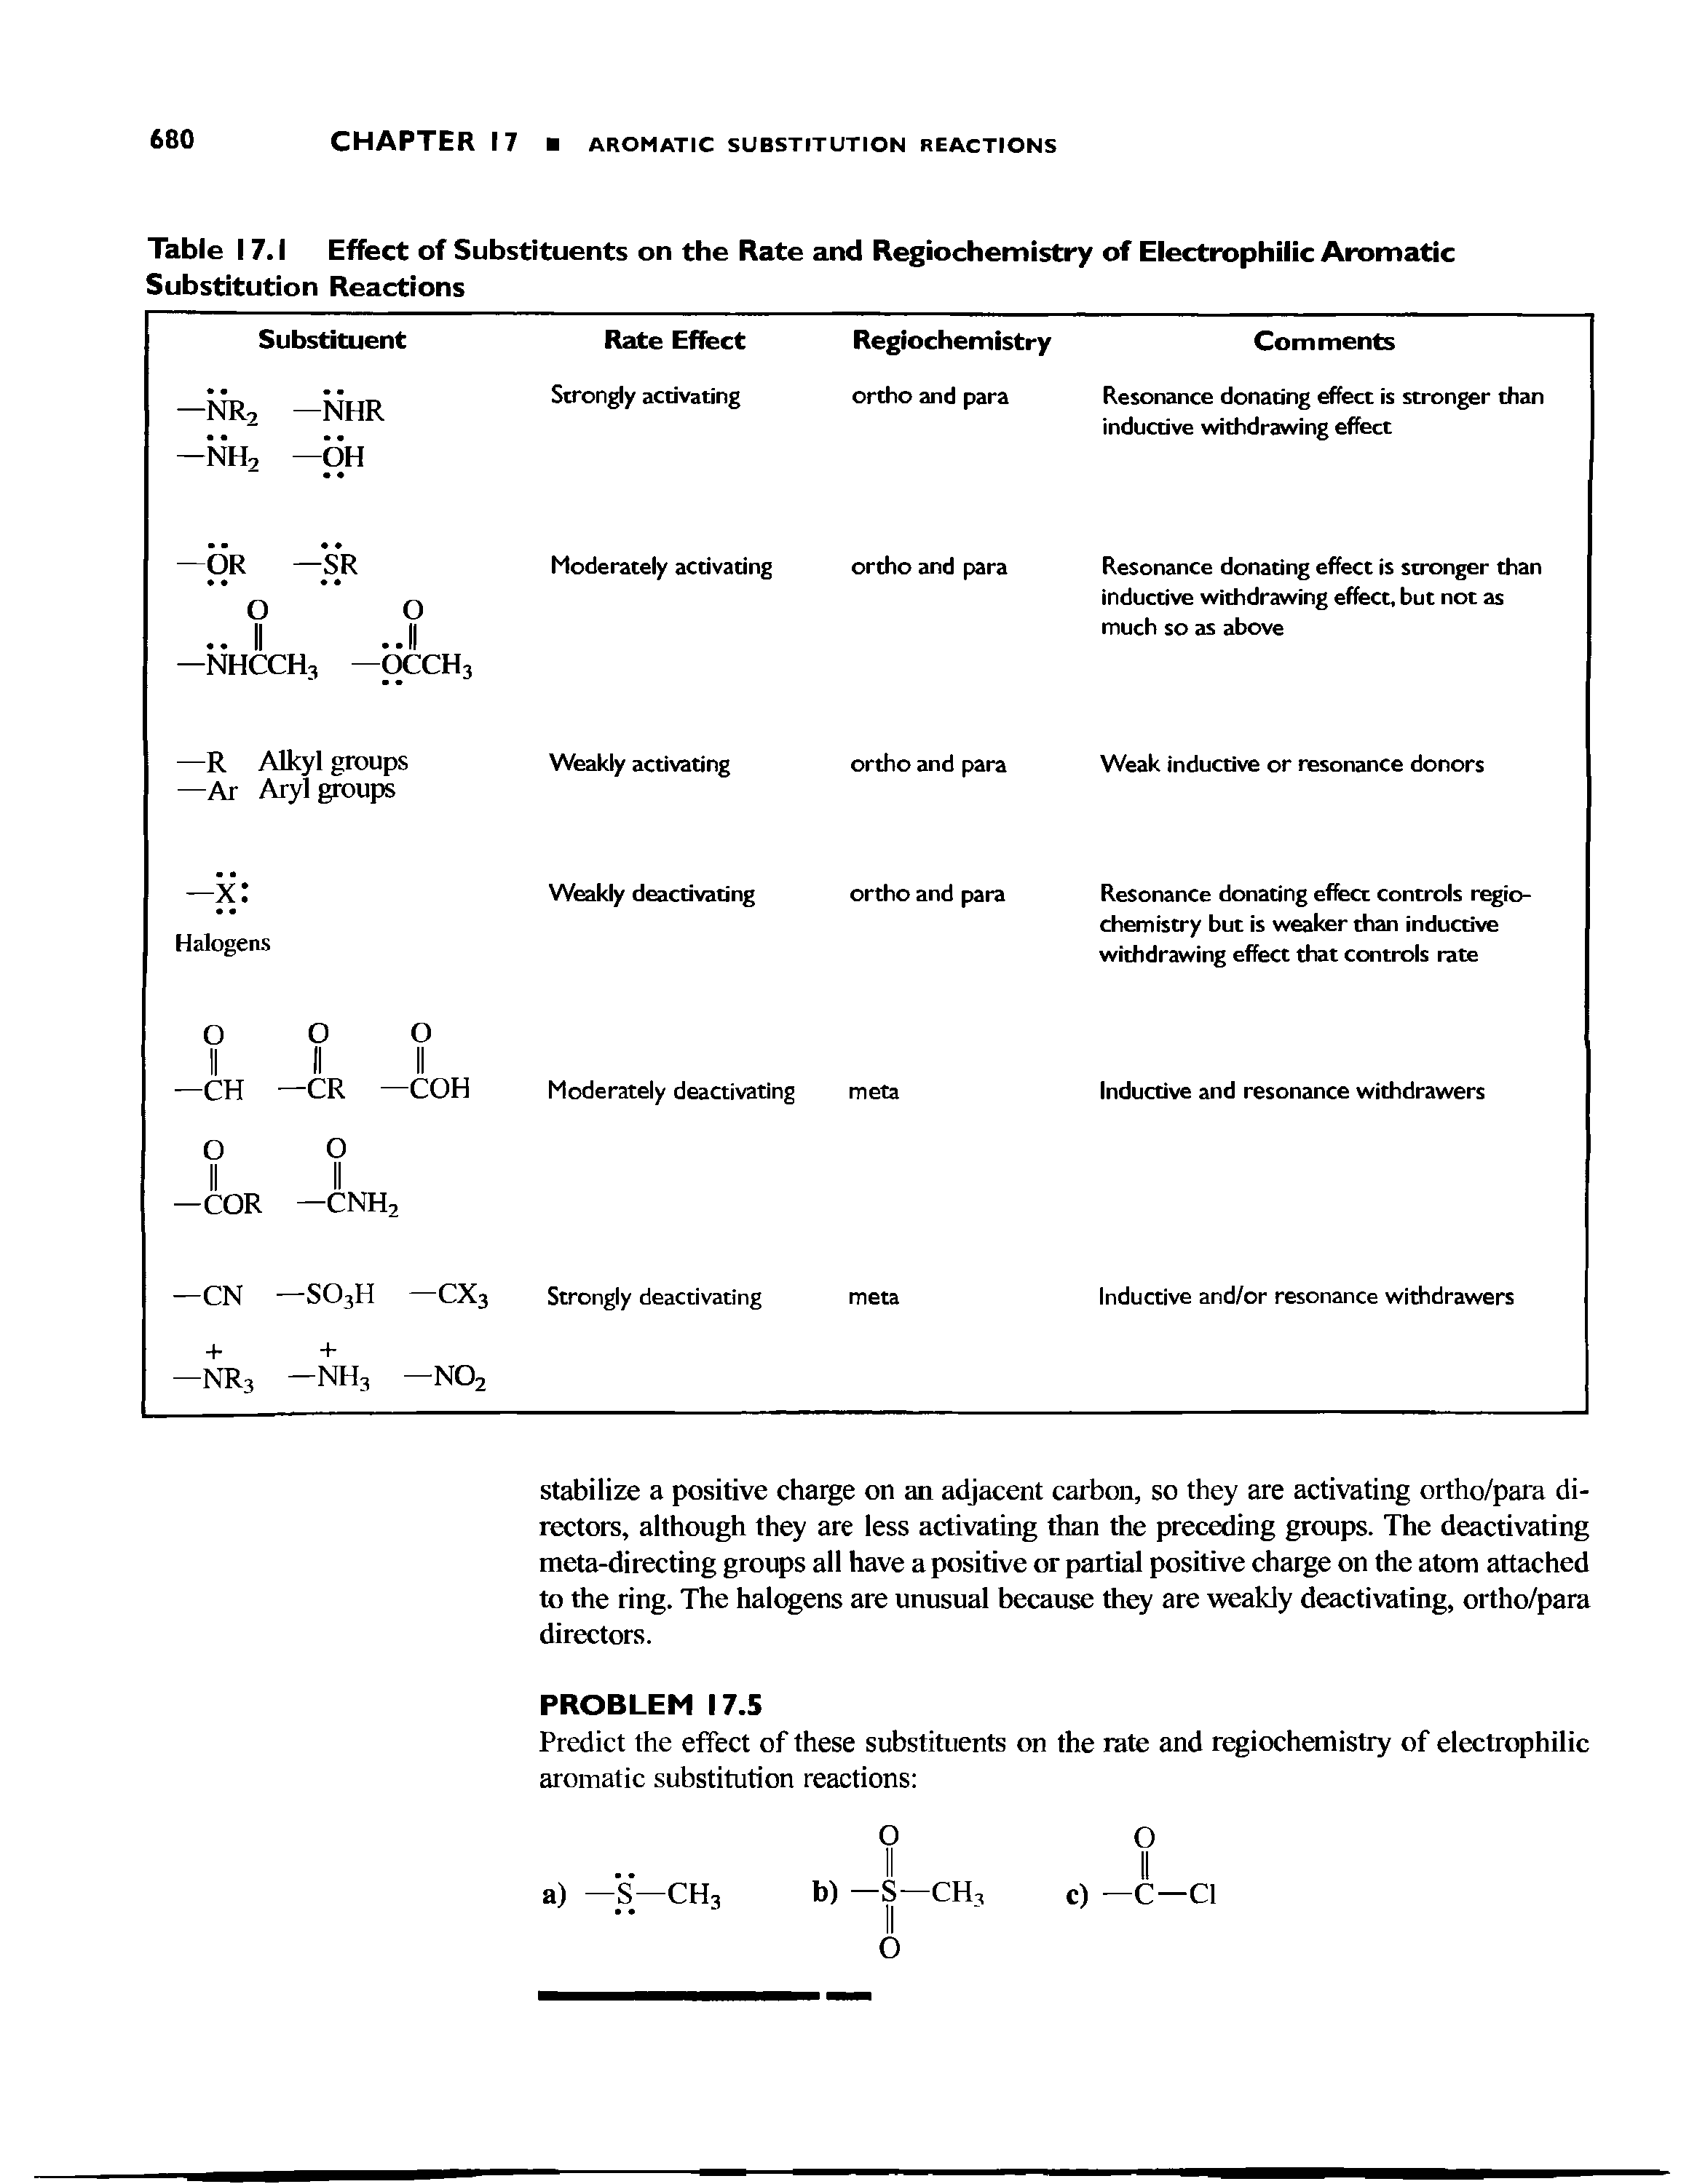 Table 17.1 Effect of Substituents on the Rate and Regiochemistry of Electrophilic Aromatic Substitution Reactions...